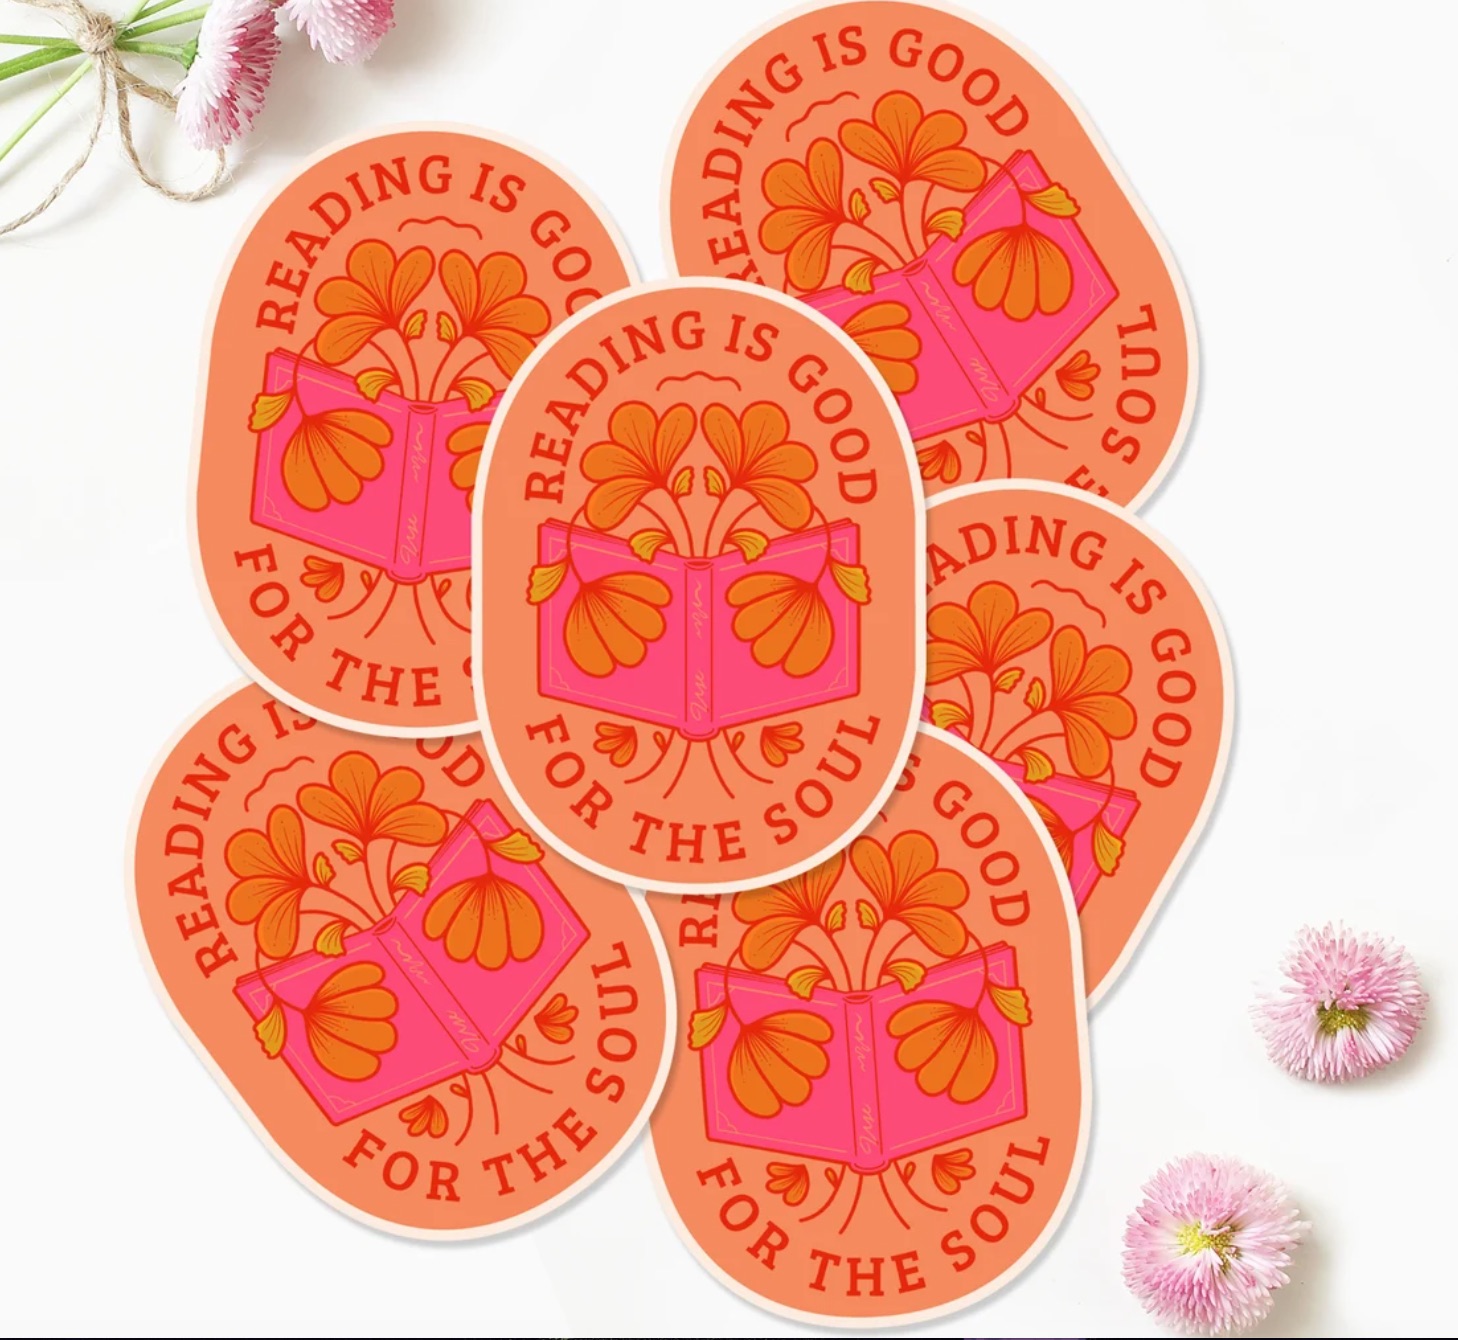 stickers that say "reading is good for the soul"